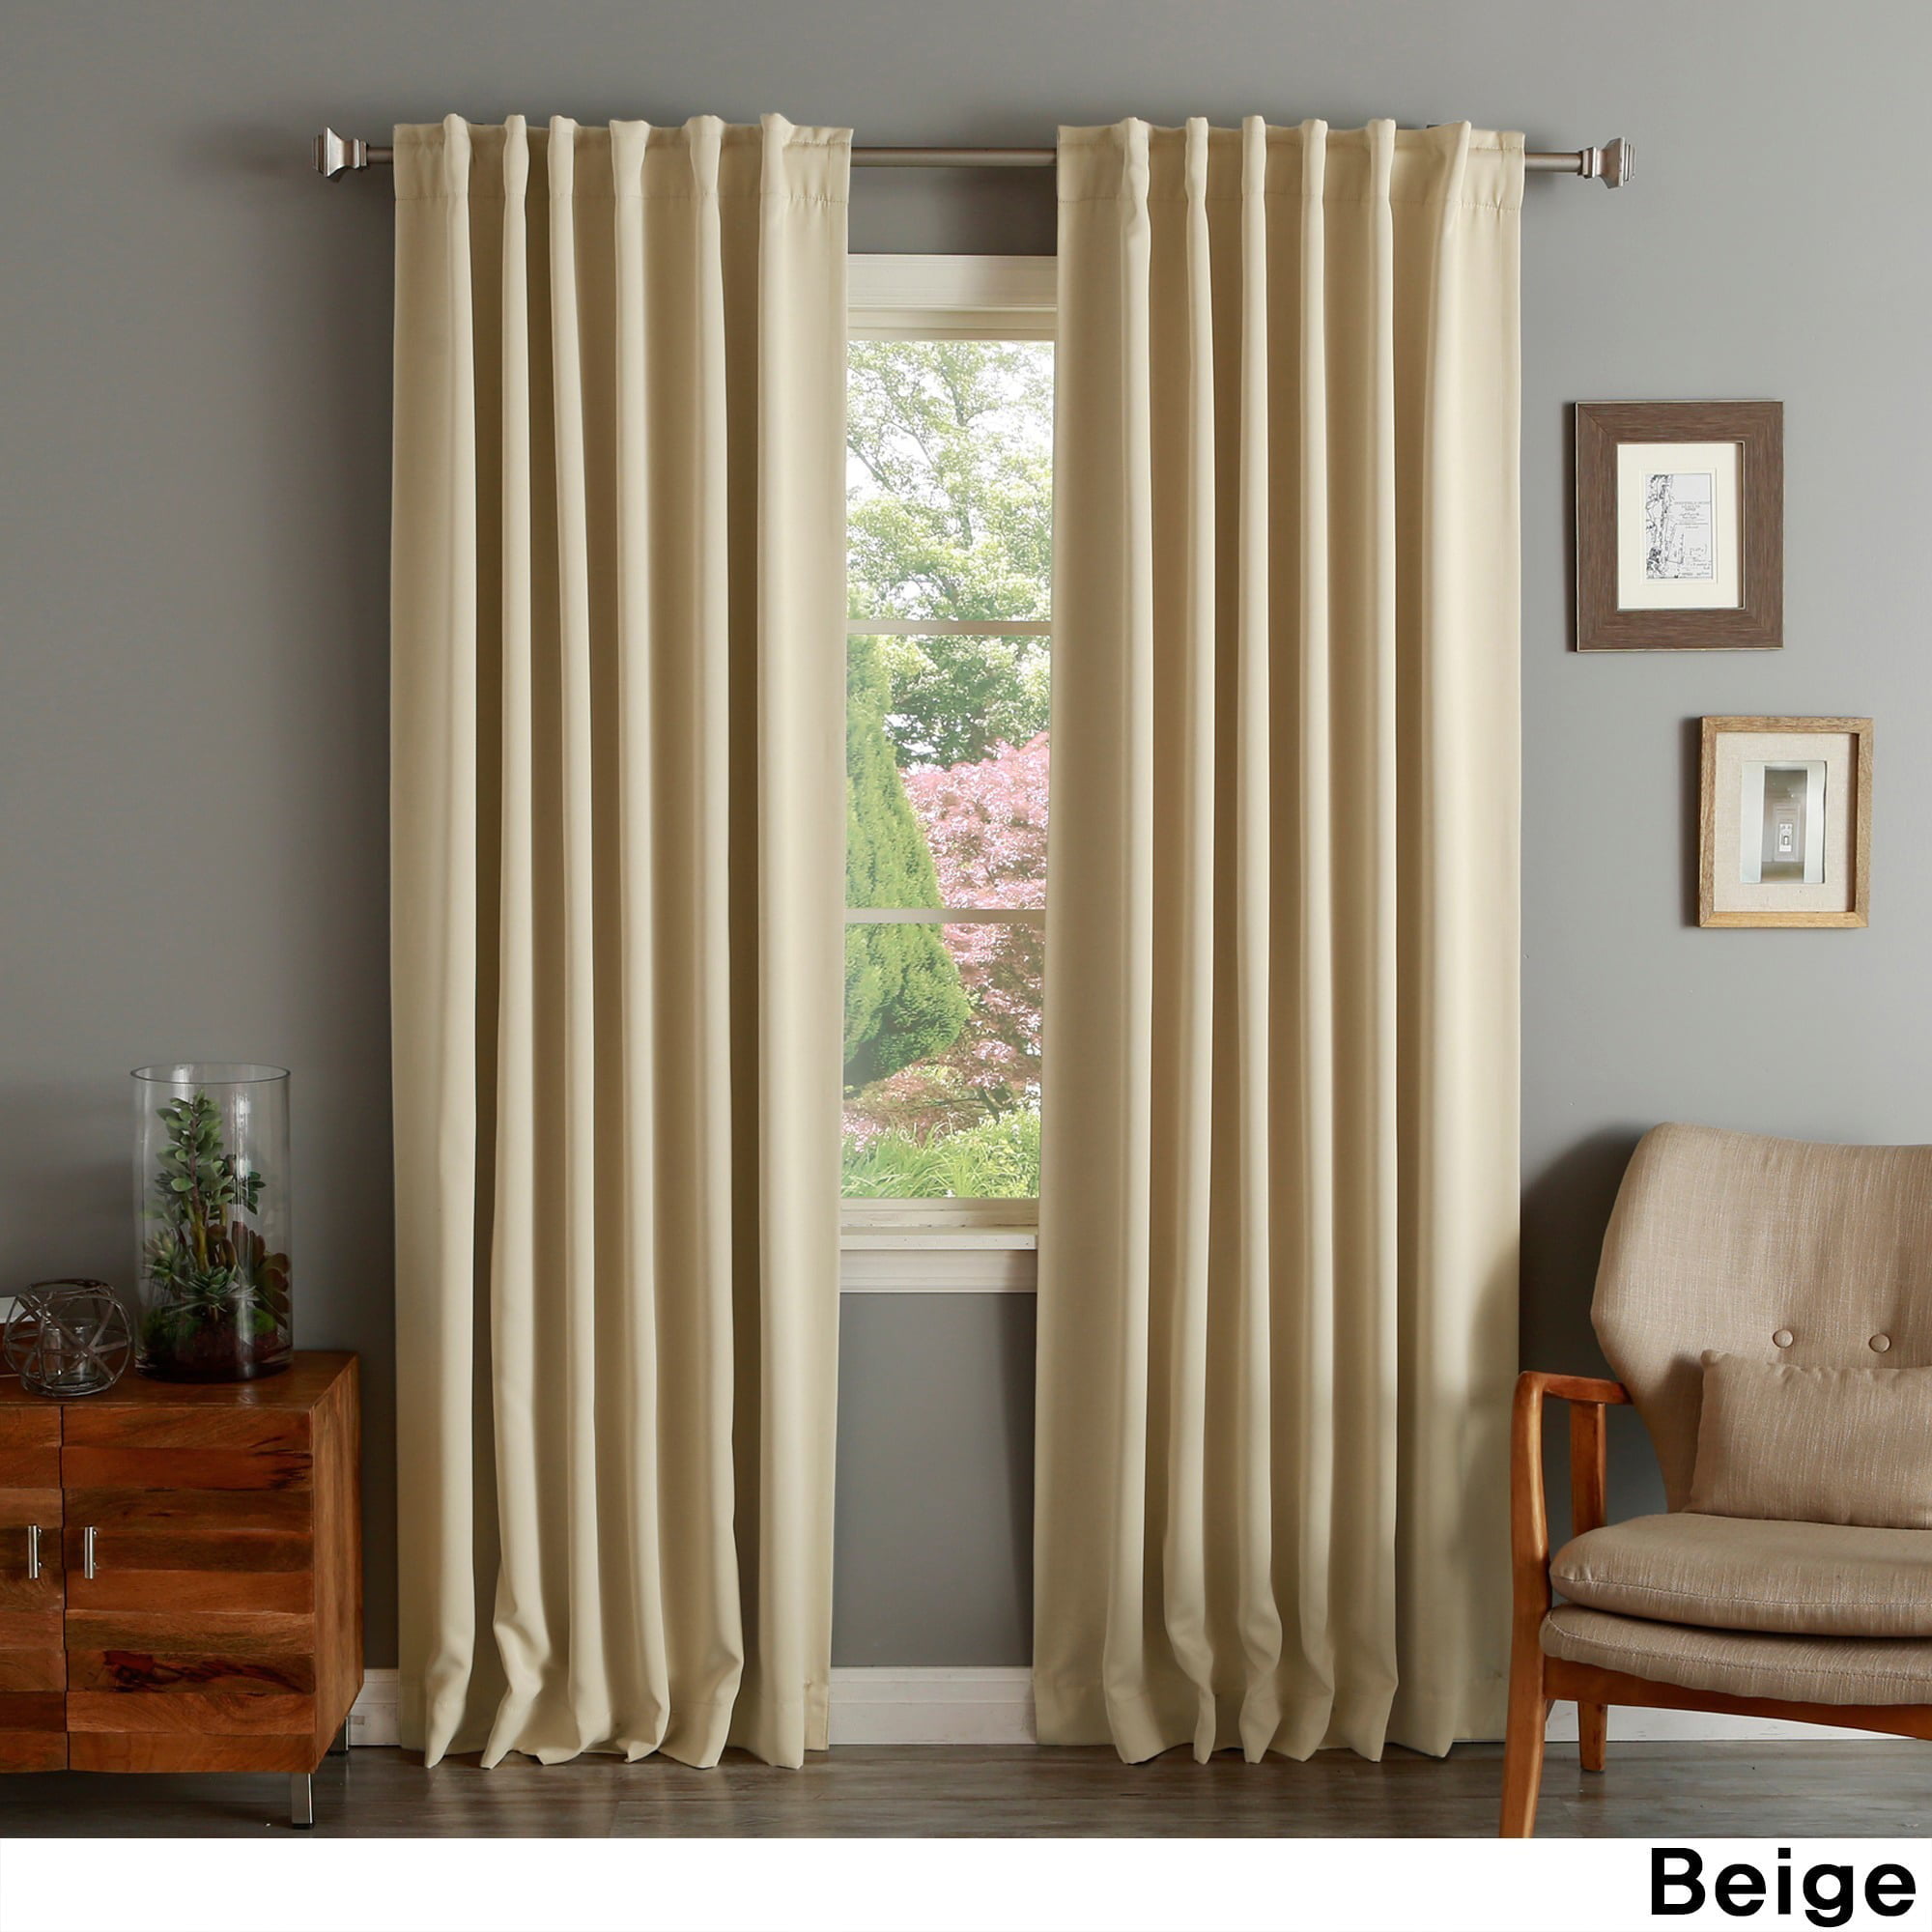 Aurora Home Solid Thermal Insulated 108 Inch Blackout Curtain Panel Pair 52 X 108 Walmart Com